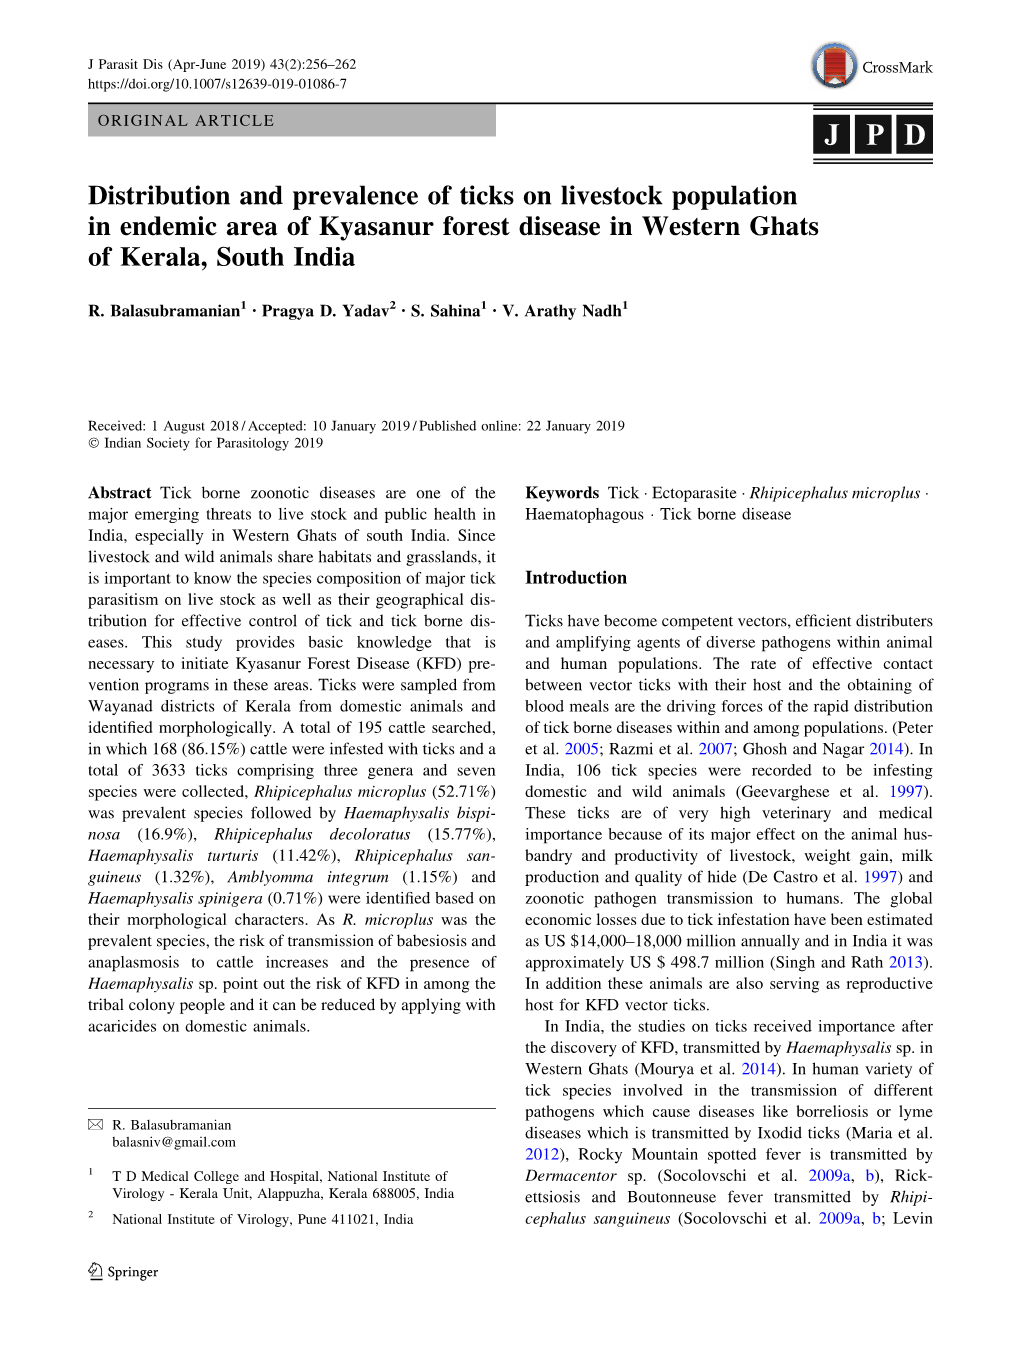 Distribution and Prevalence of Ticks on Livestock Population in Endemic Area of Kyasanur Forest Disease in Western Ghats of Kerala, South India